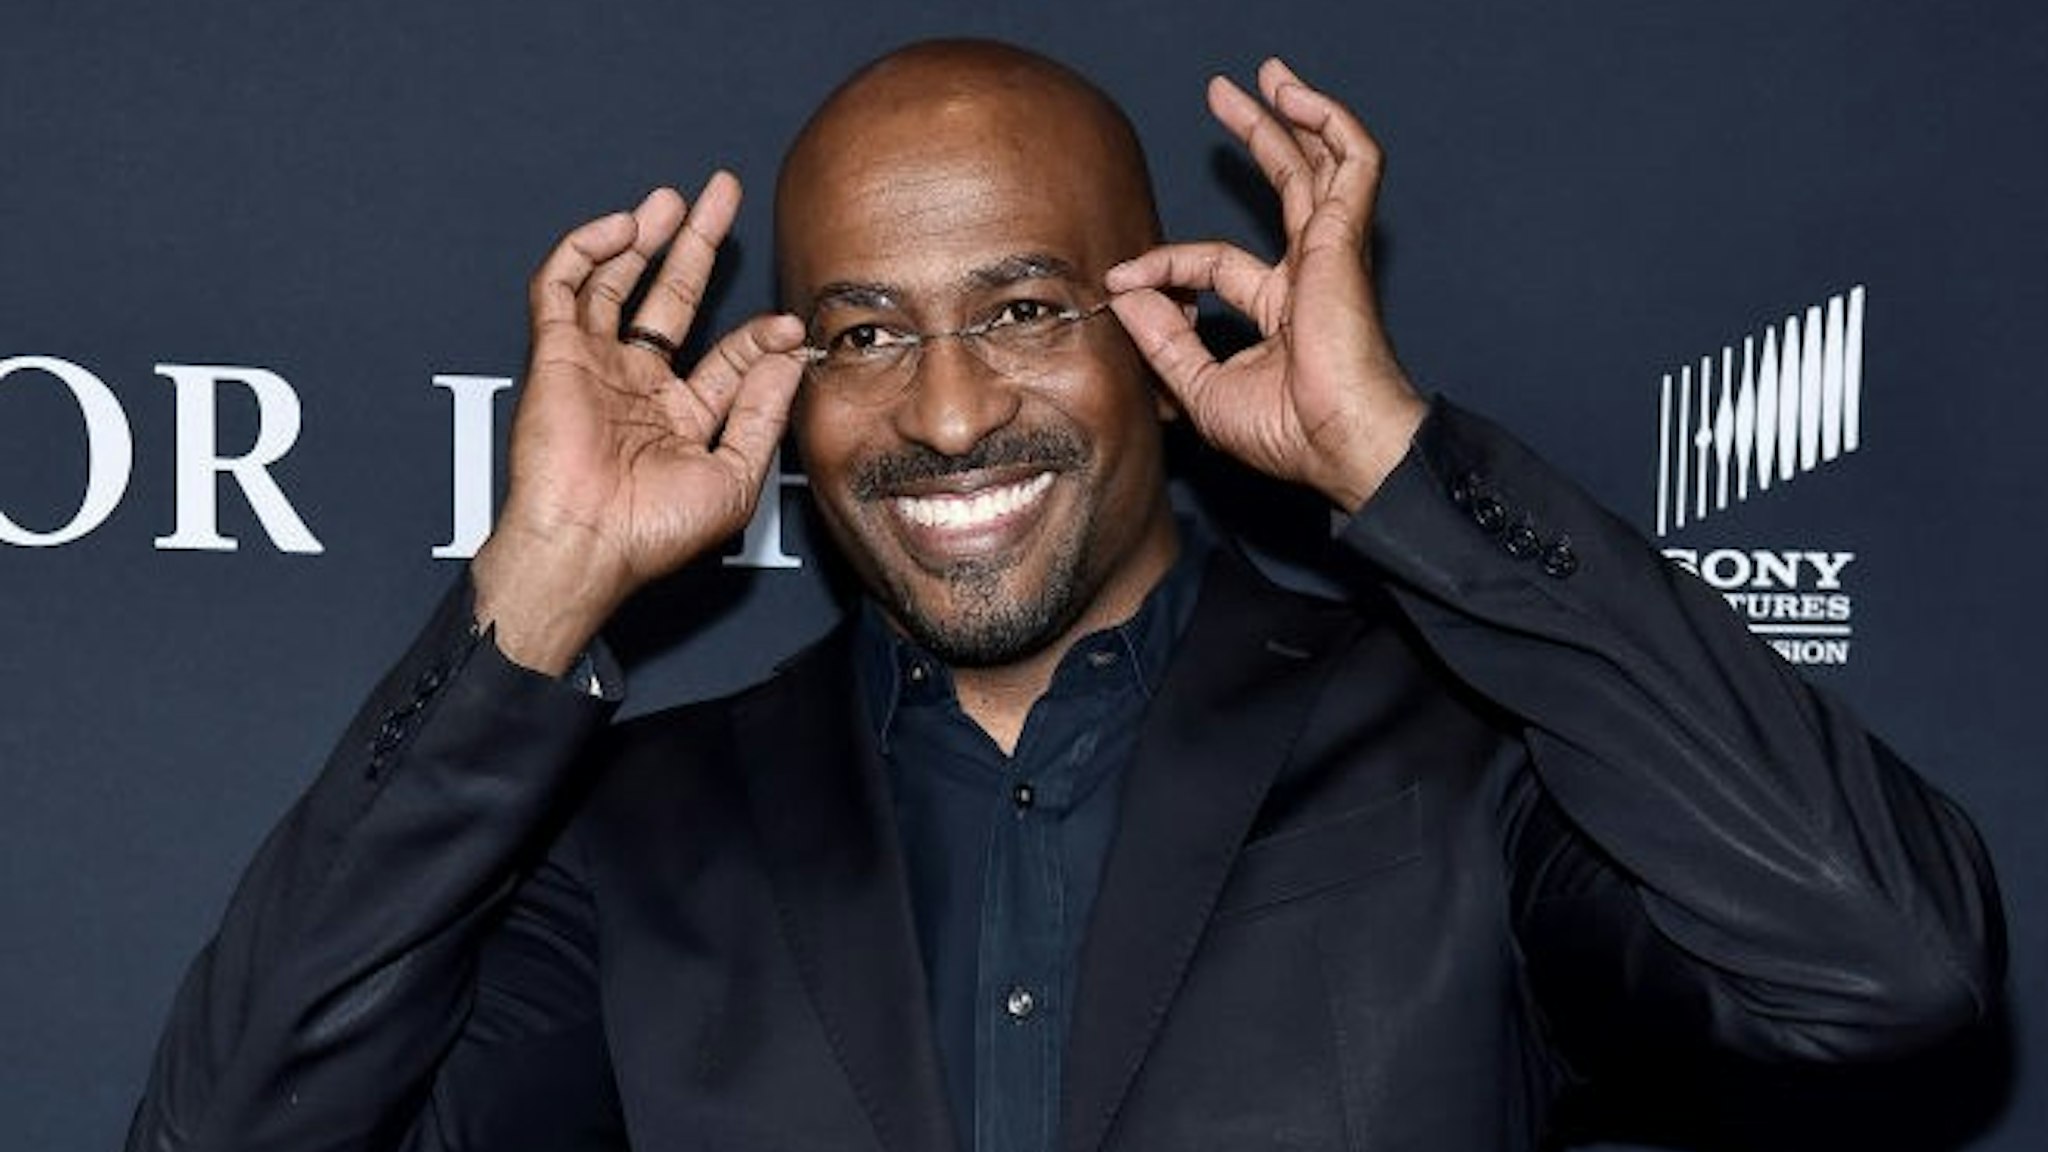 NEW YORK, NEW YORK - FEBRUARY 05: Van Jones attends the New York Premiere of ABC's "For Life" at Alice Tully Hall, Lincoln Center on February 05, 2020 in New York City. (Photo by